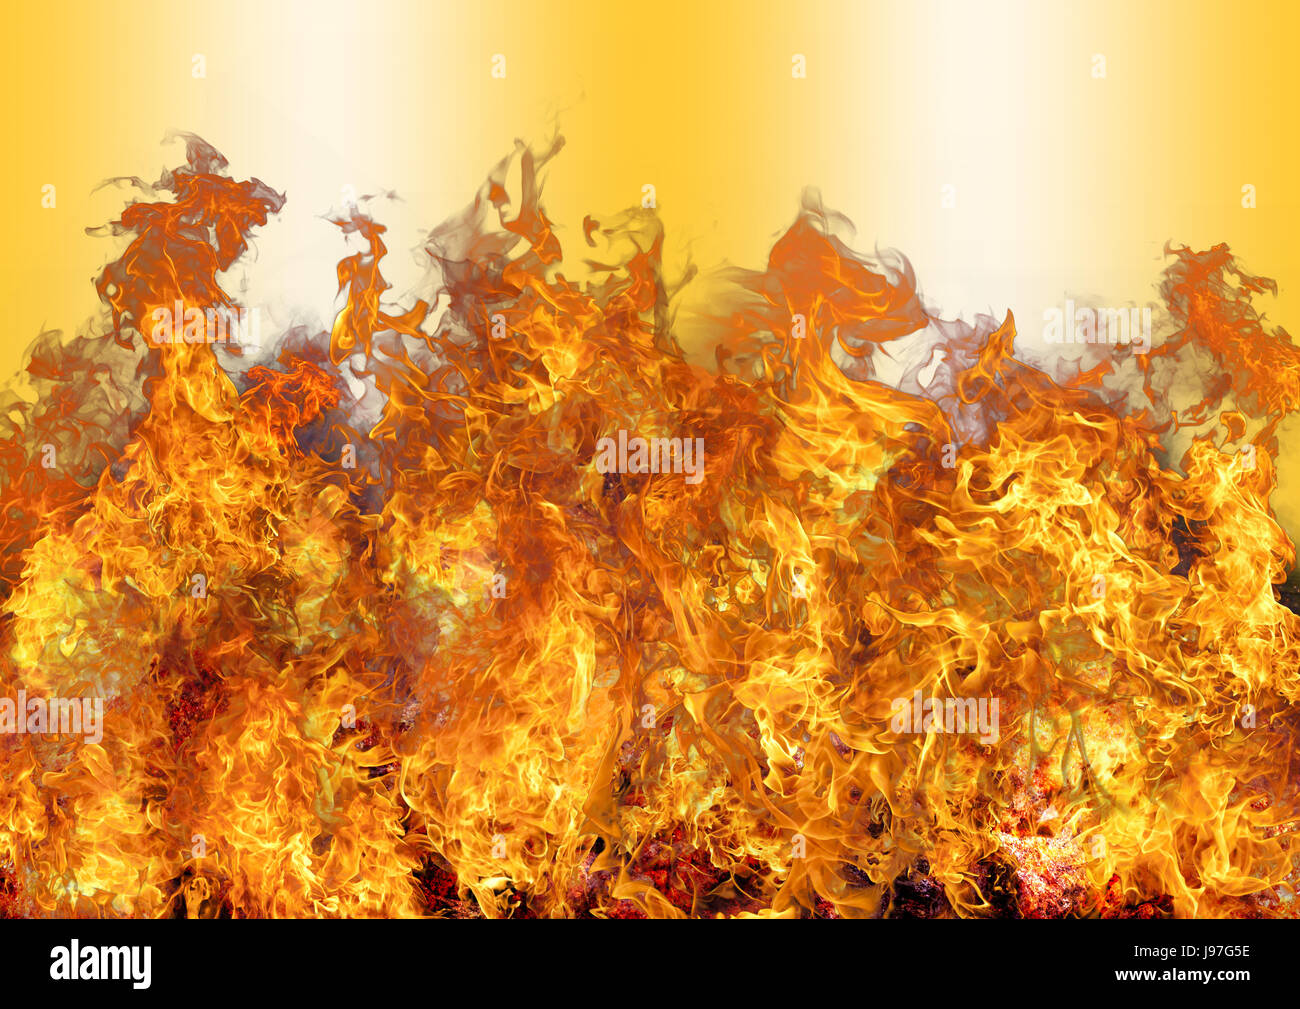 Beautiful stylish fire flames, isolated against the golden colored background Stock Photo